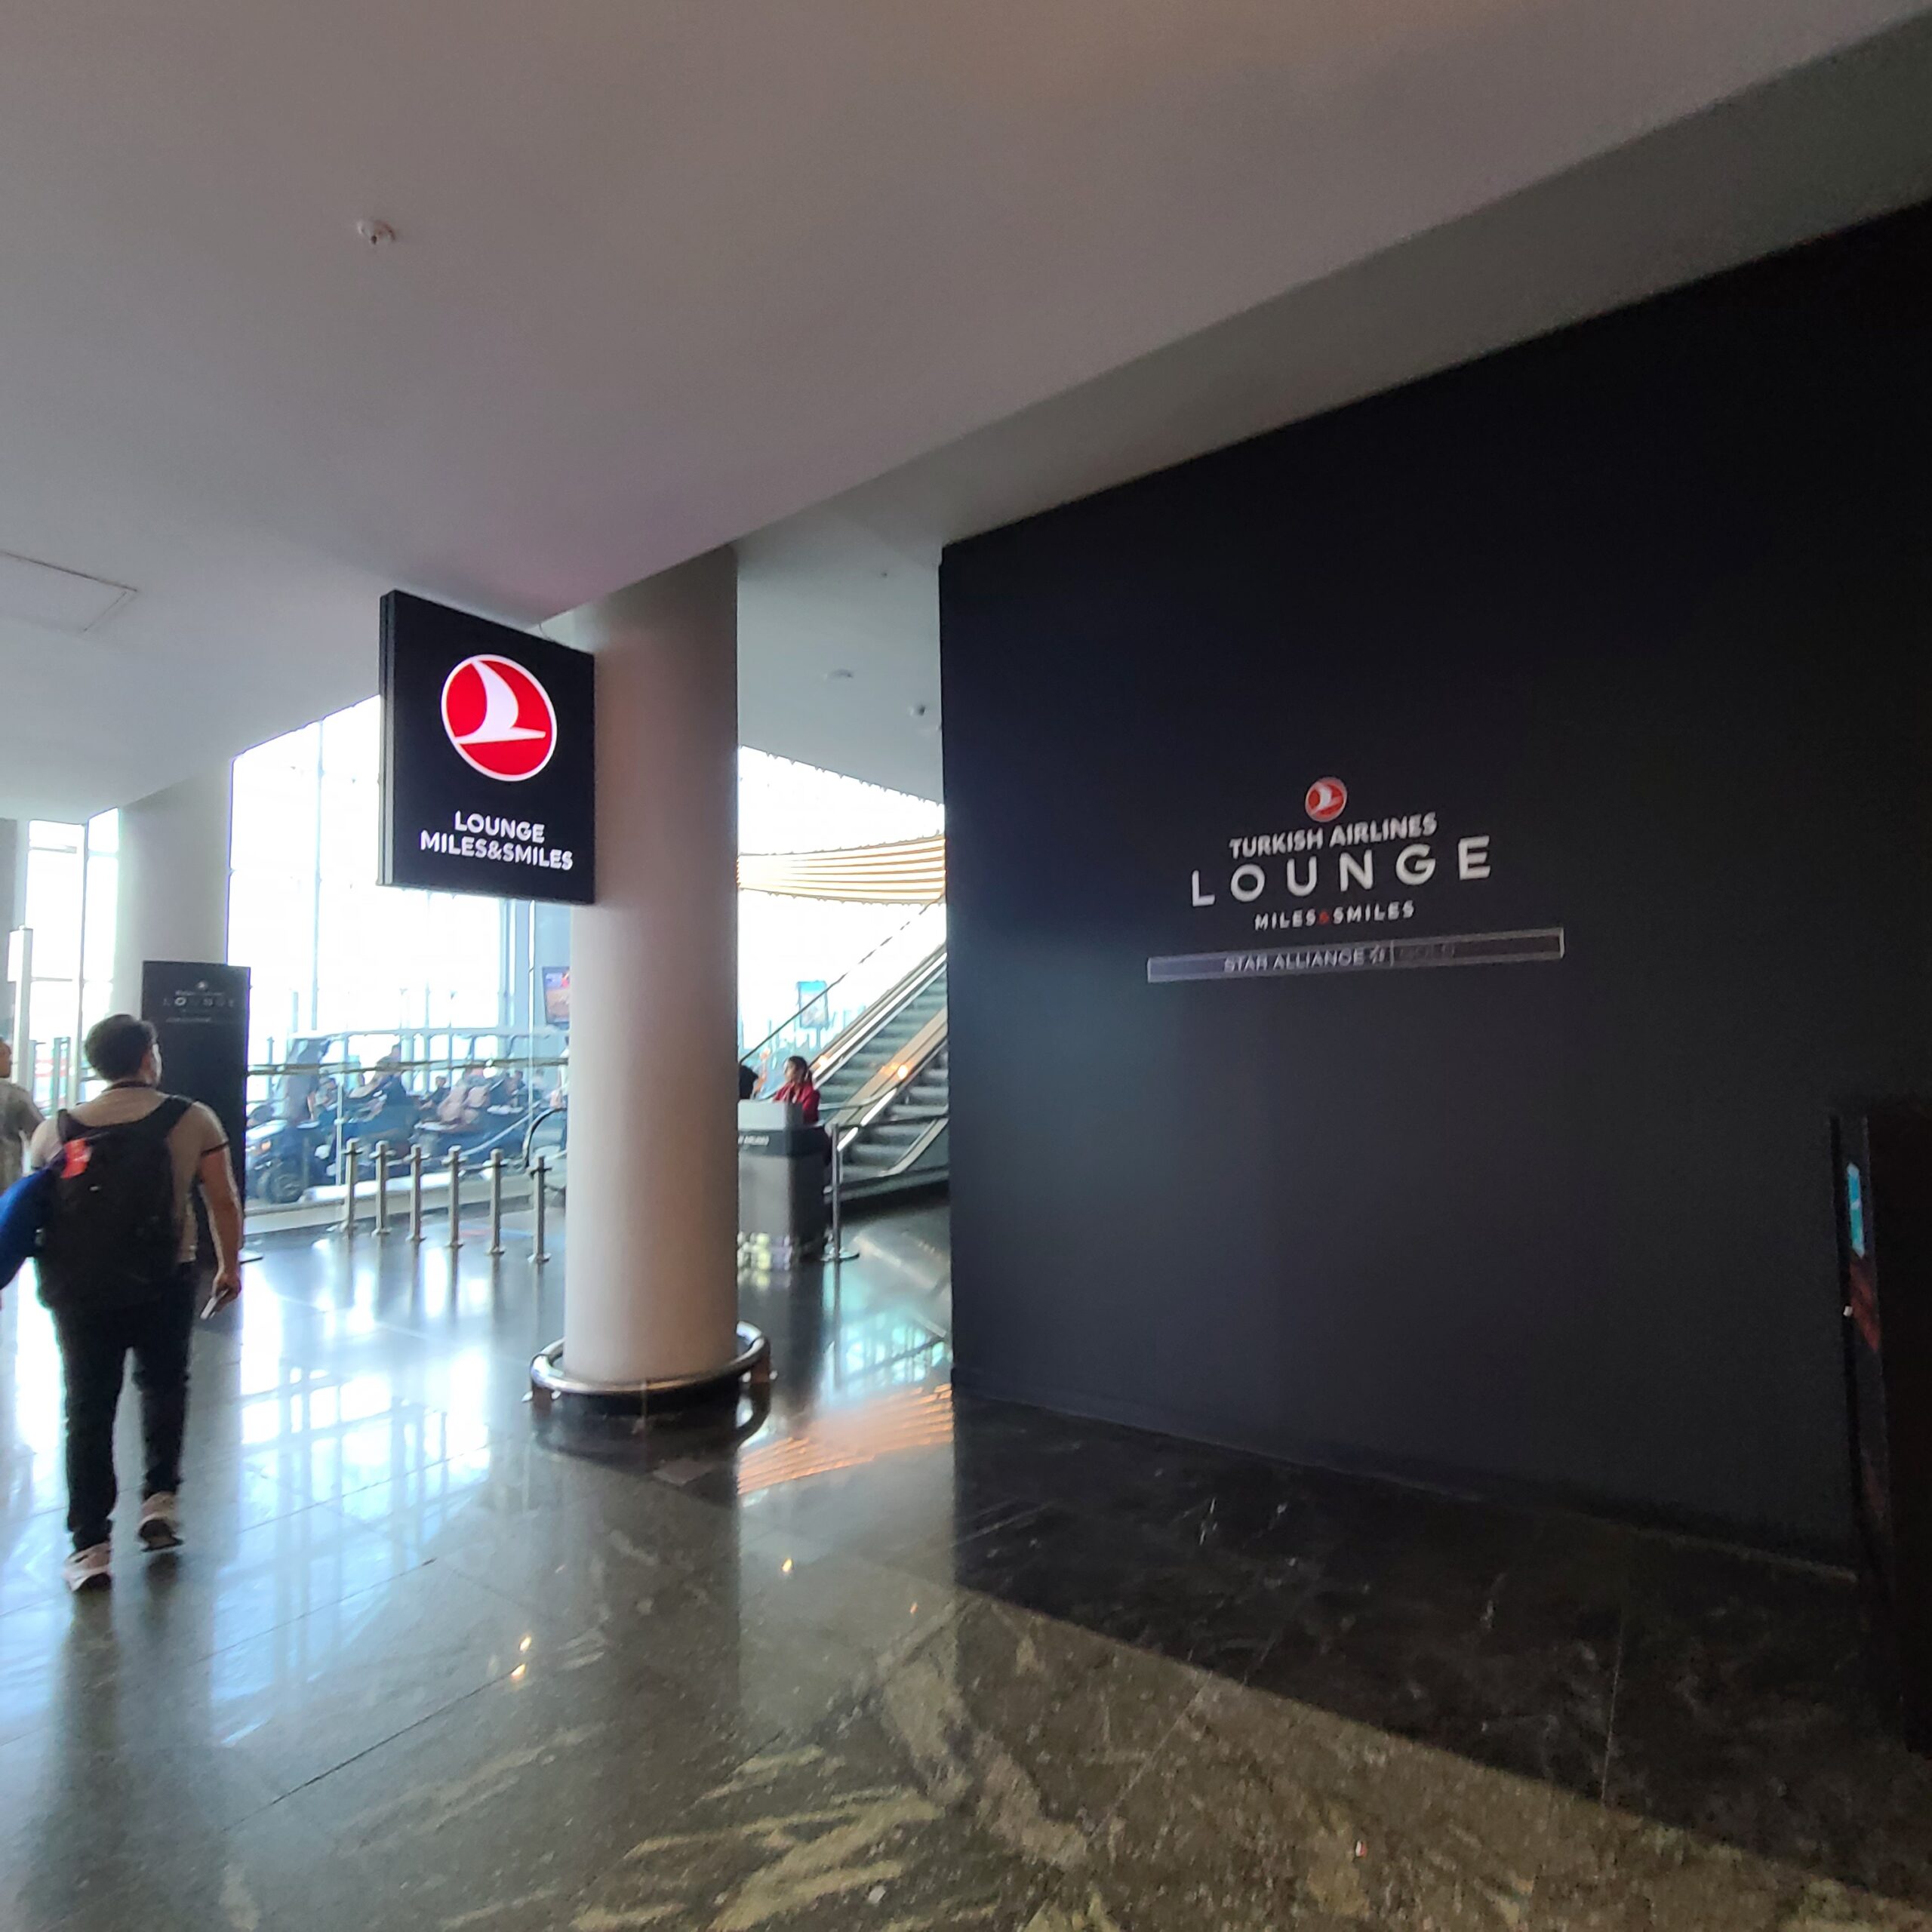 Turkish Airlines Business Class Lounge IST Entry